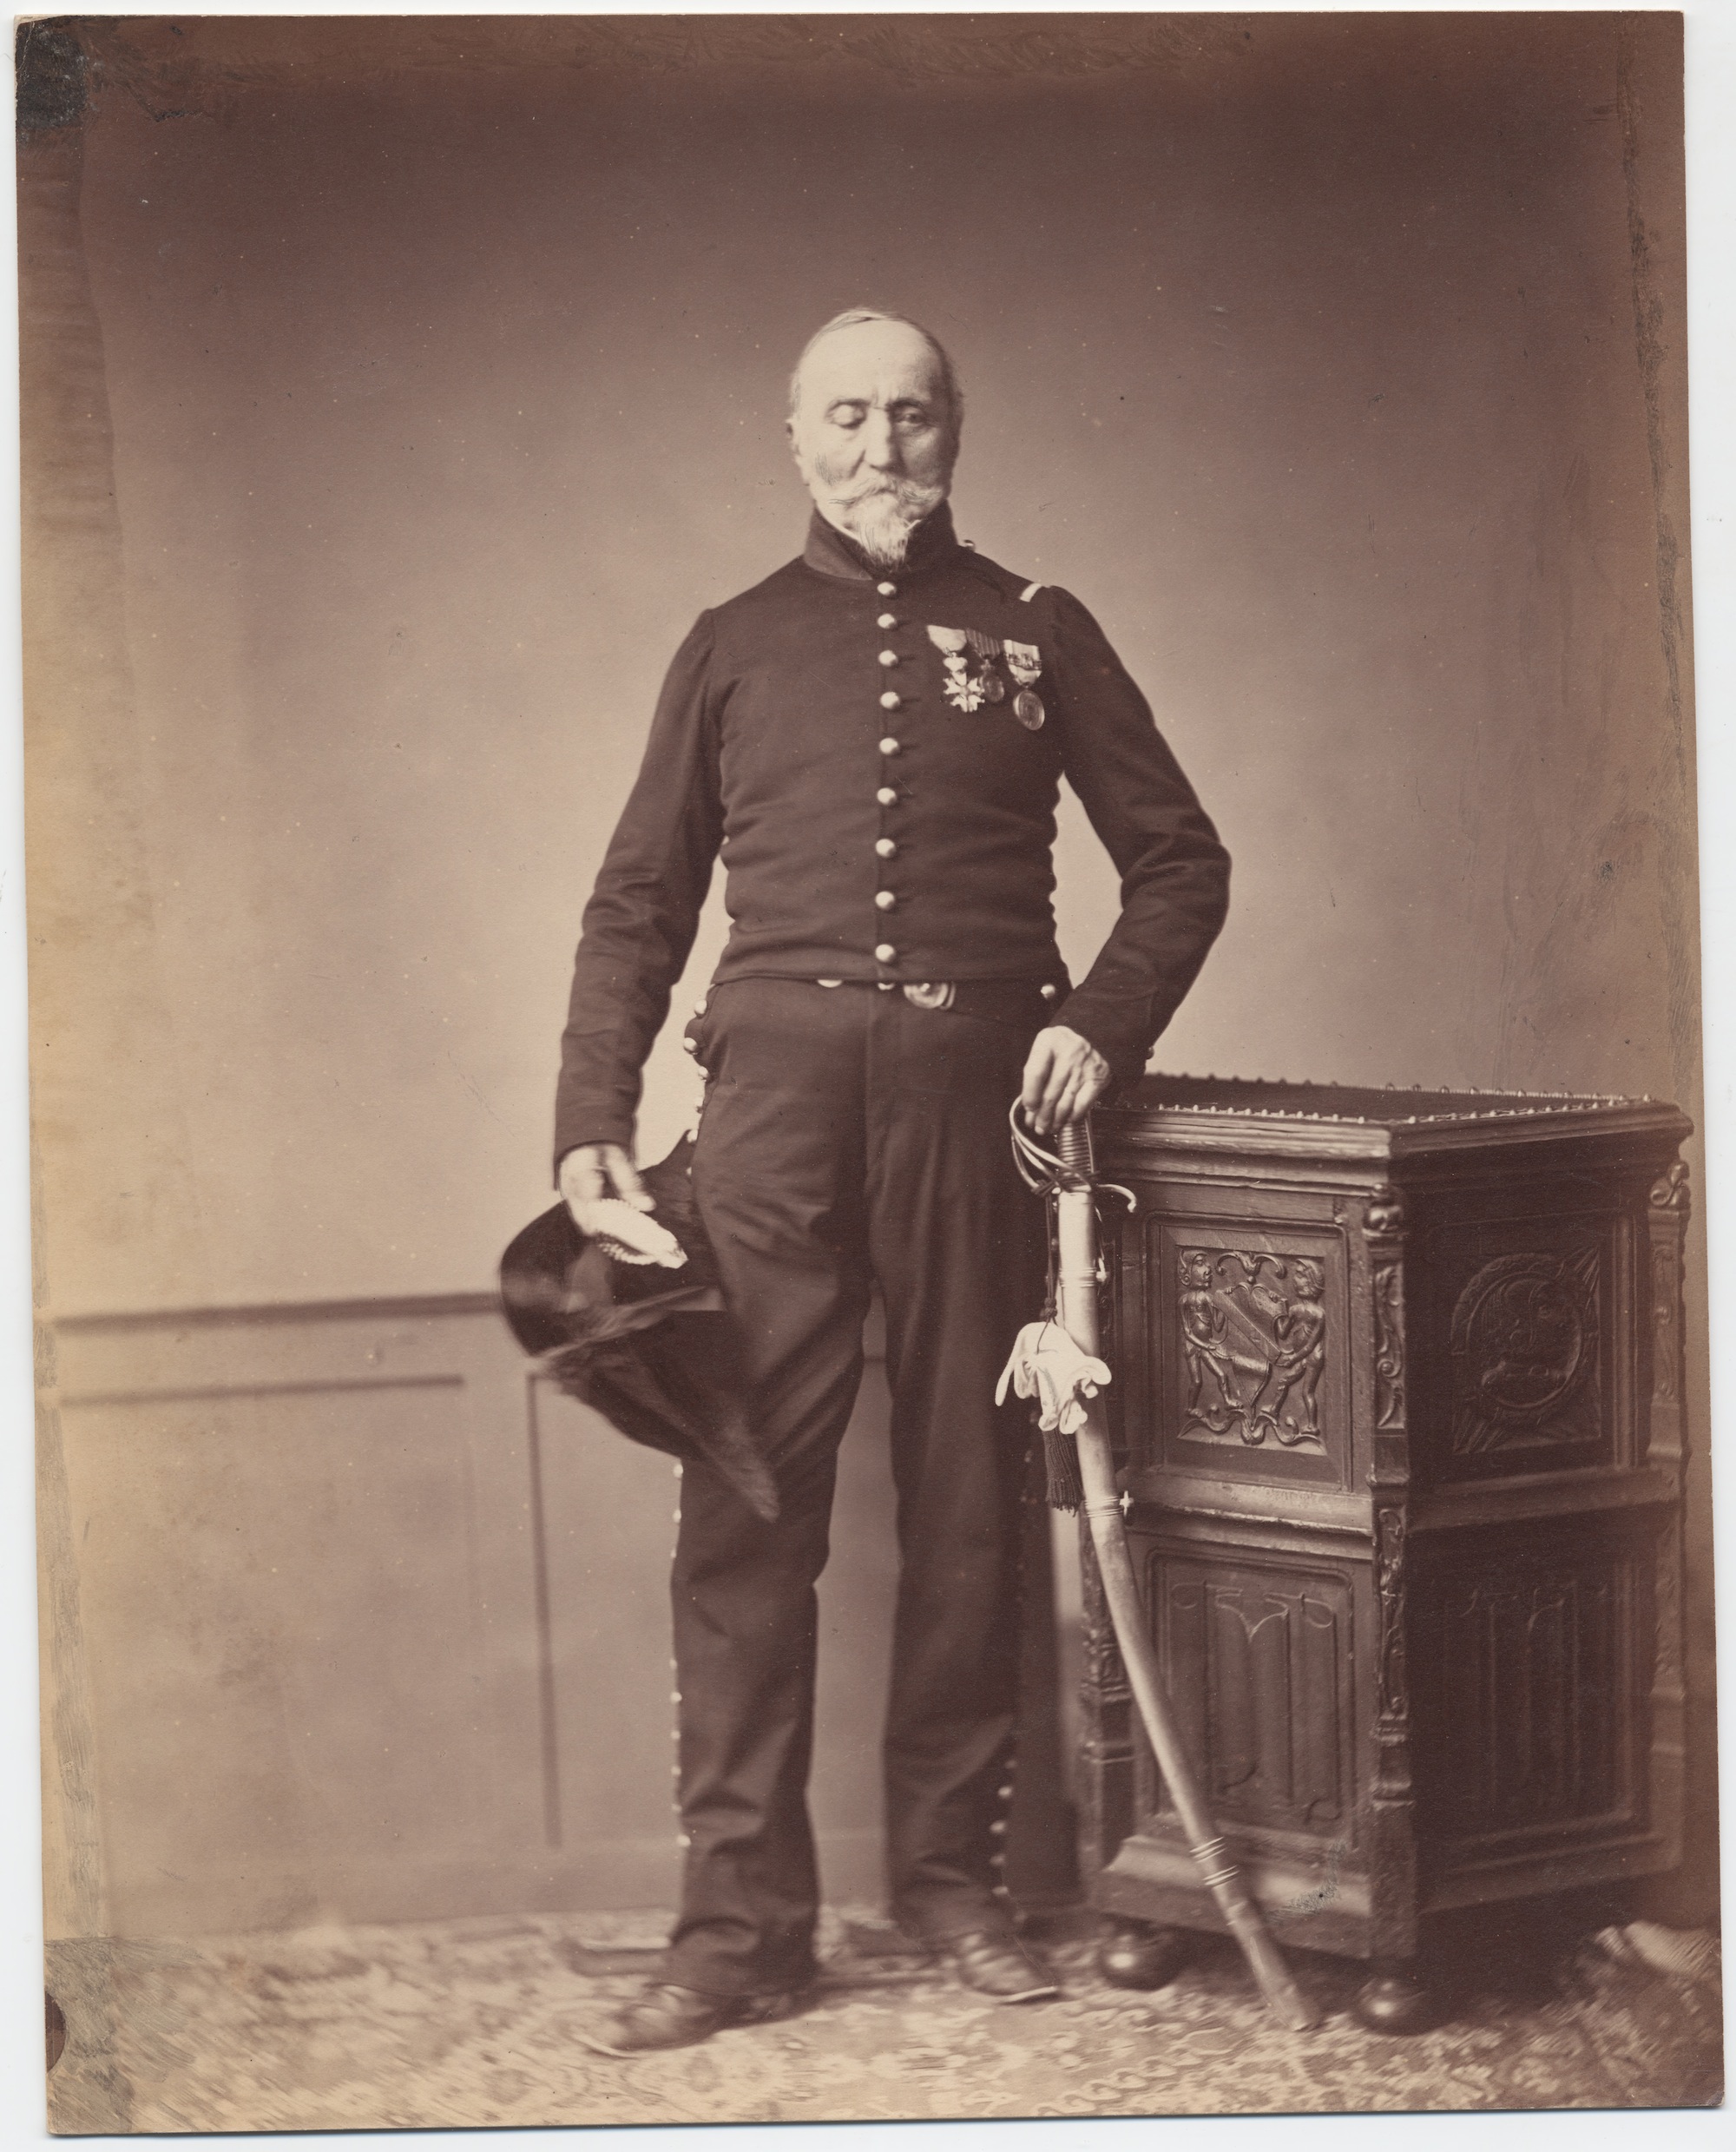 Monsieur Loria, 24th Mounted Chasseur, Regiment Chevalier of the Legion of Honor. Monsieur Loria seems to have lost his right eye.